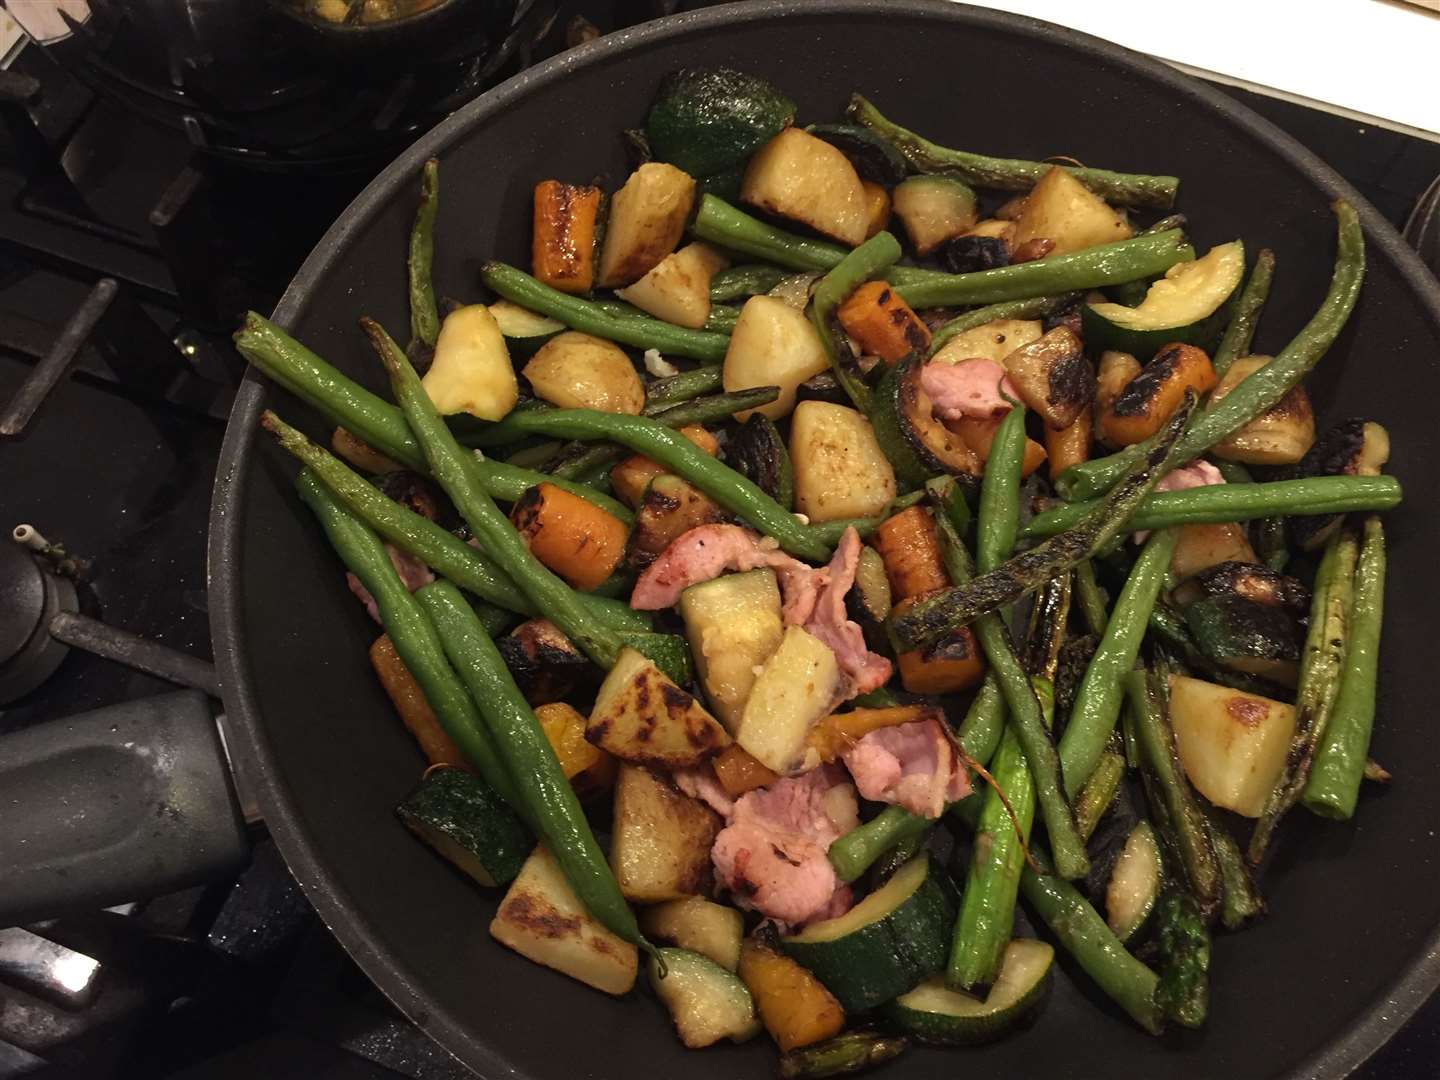 Carrots, green beans, potatoes, asparagus, courgette and a little bacon